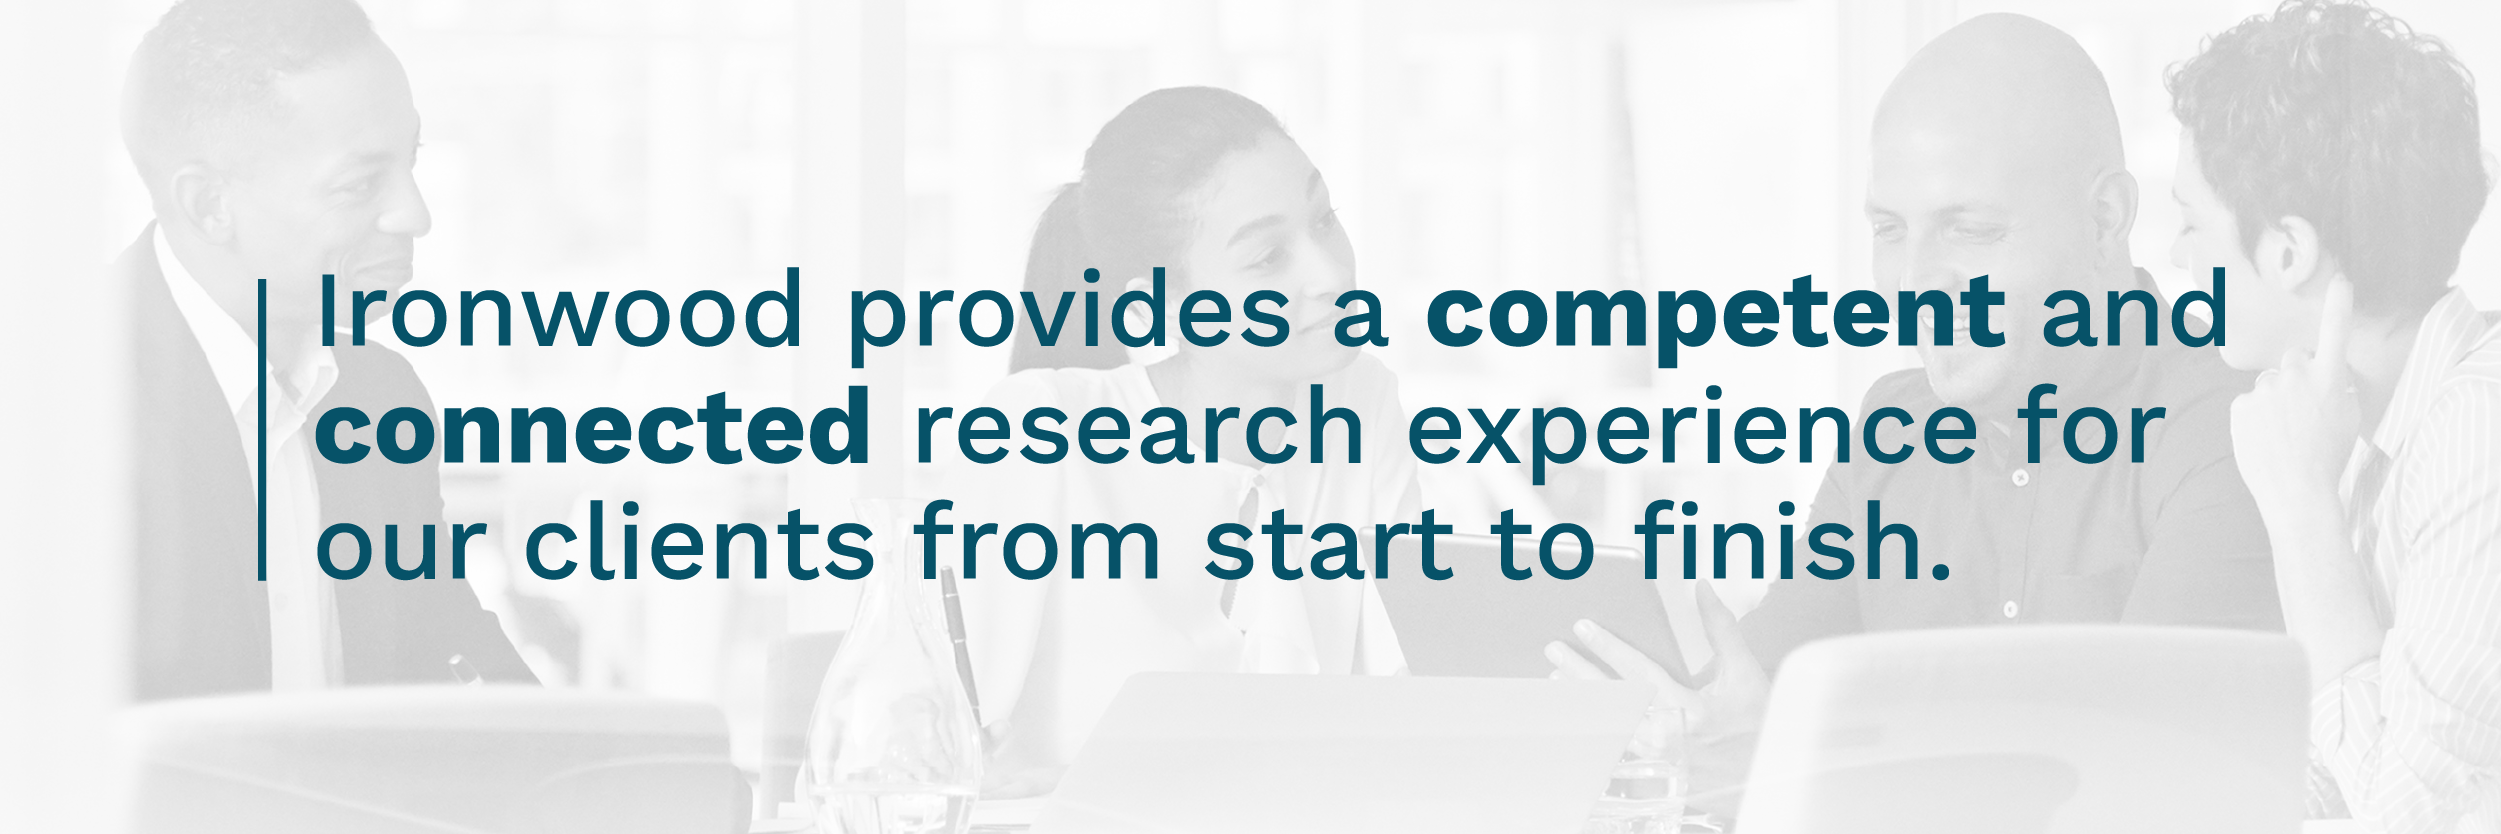 Ironwood provides competent and connected research experiences for clients from start to finish.